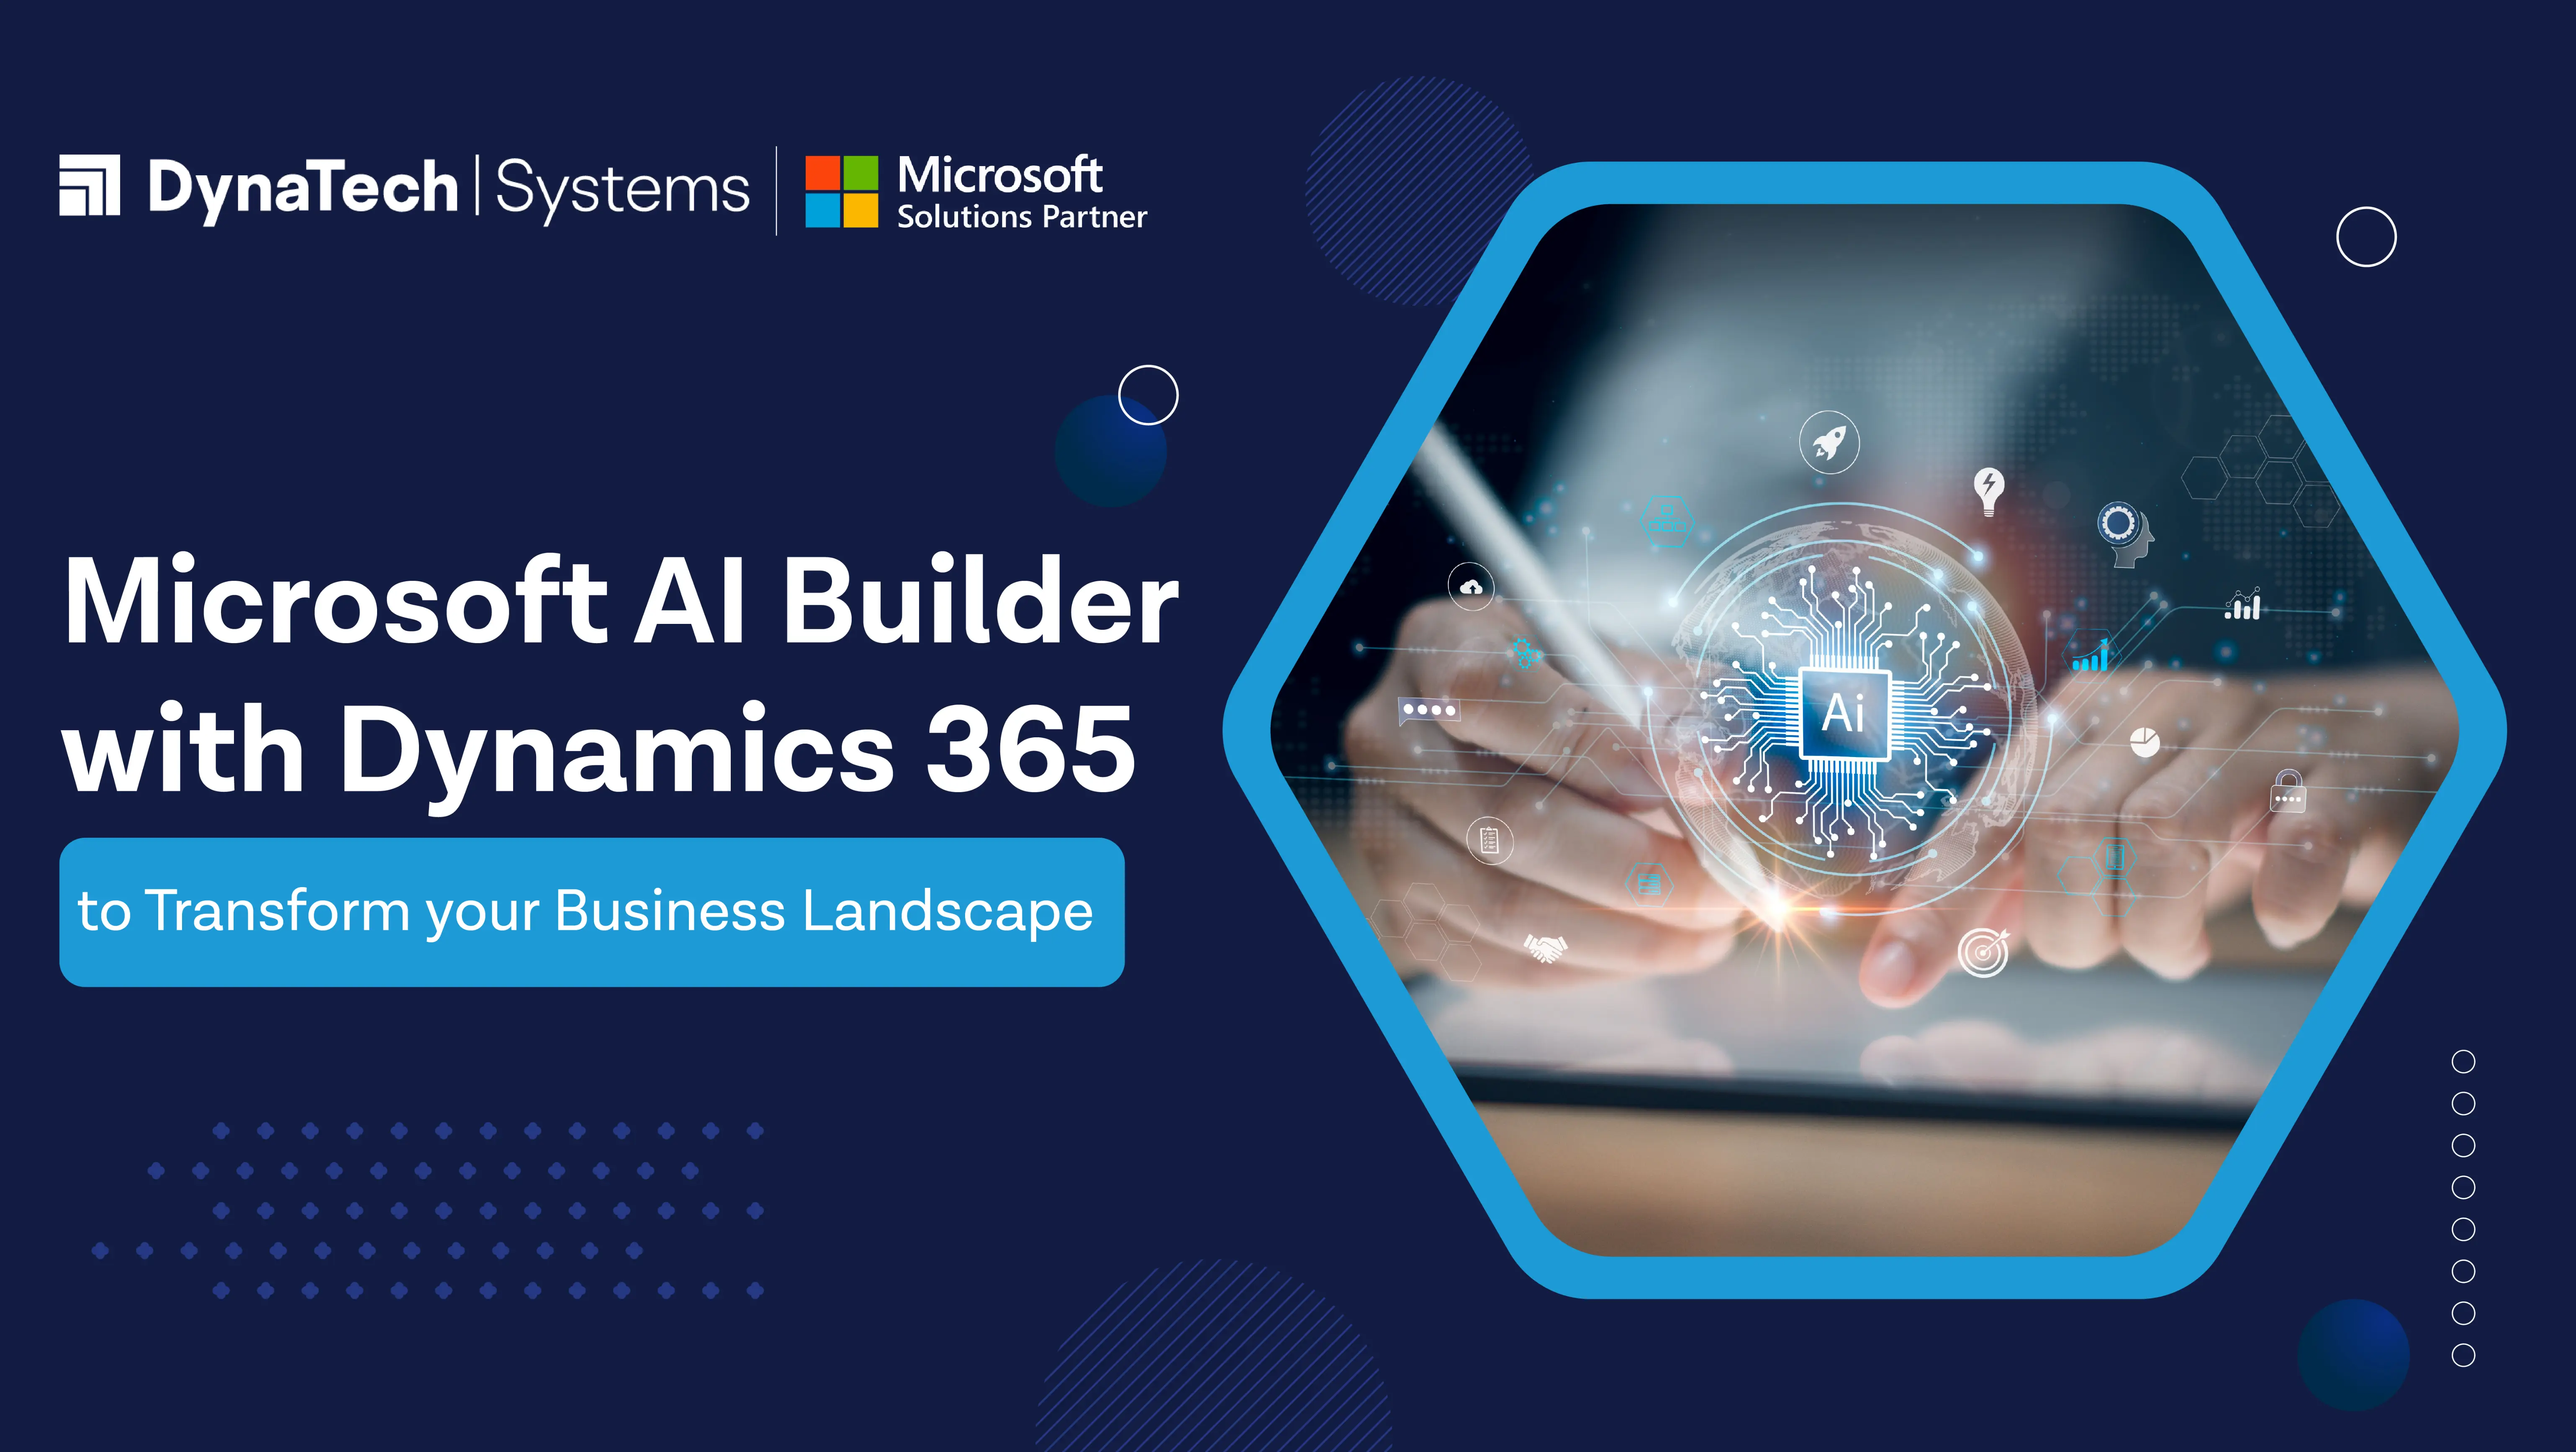 Microsoft AI Builder with Dynamics 365 to Transform your Business Landscape